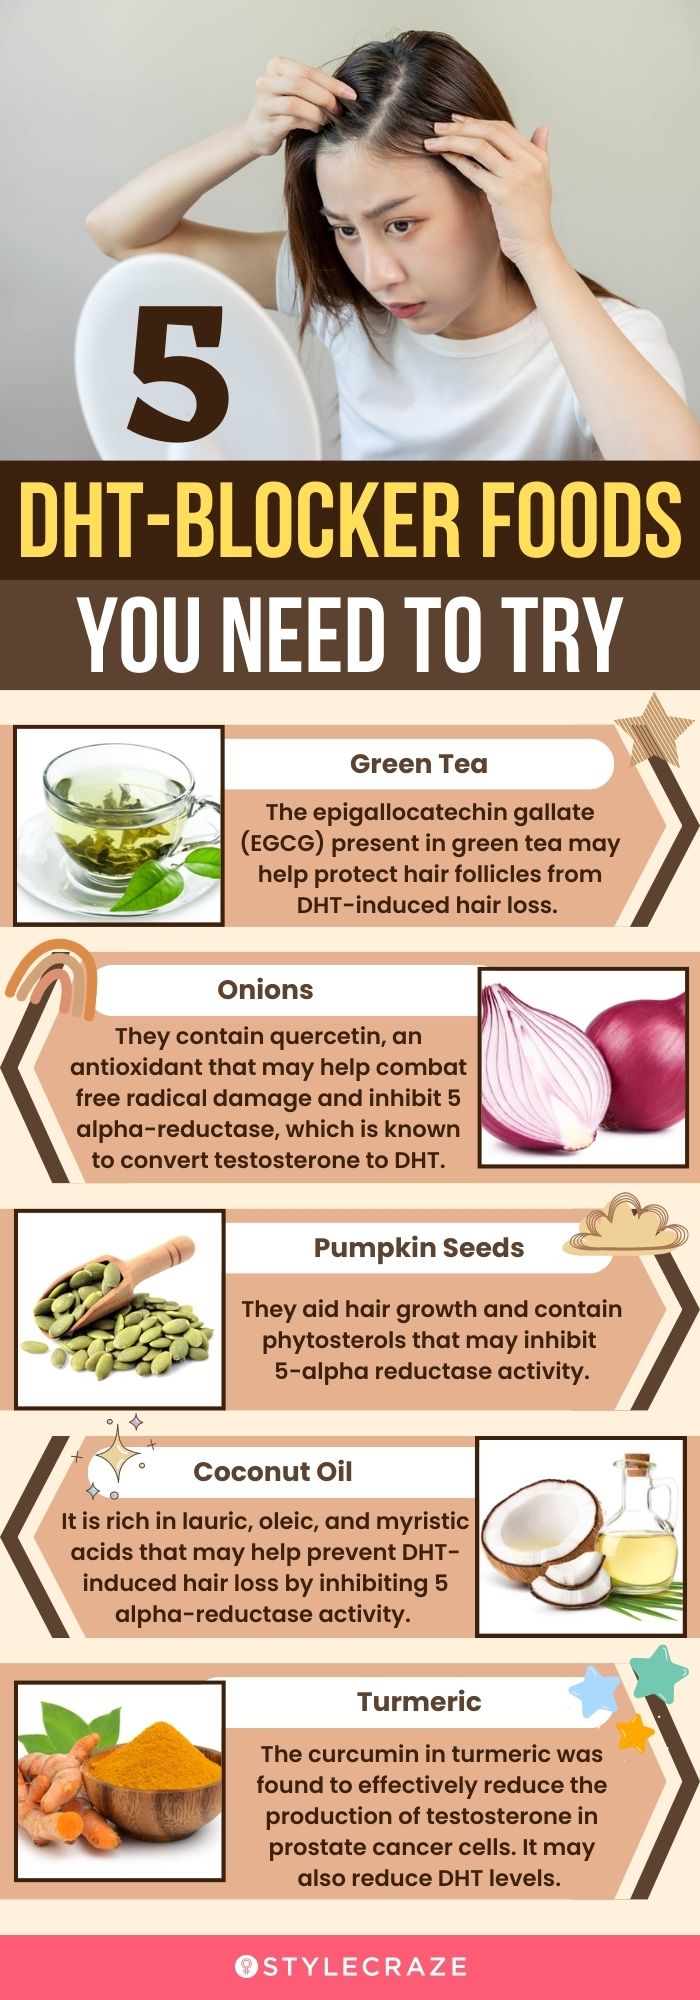 6 Best Dht Blocker Foods For Hair Loss And Tips to Reduce It  